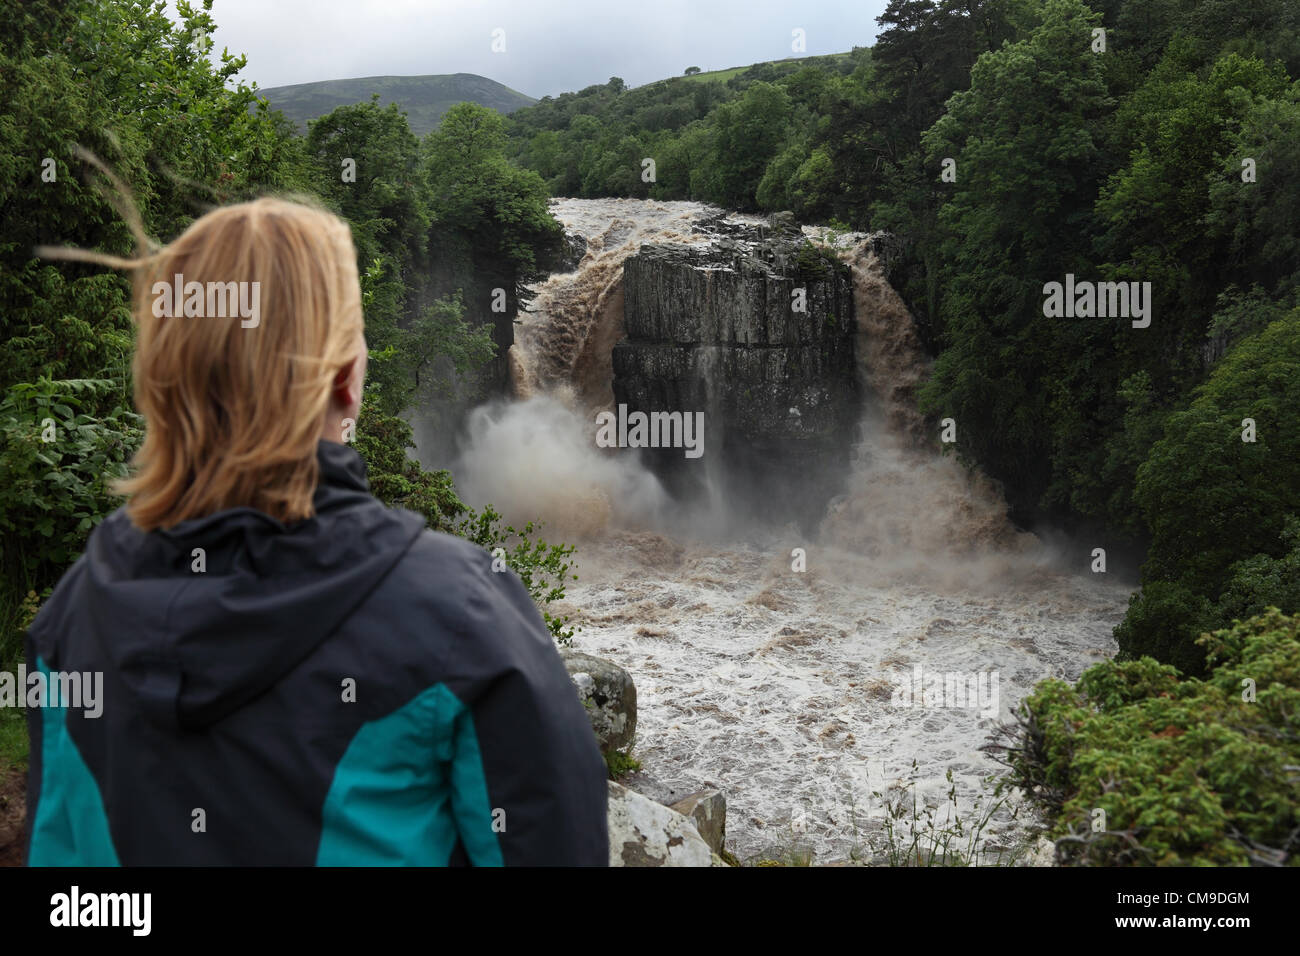 Woman Enjoying the Spectacle of High Force Waterfall on the River Tees, Teesdale, UK on the 28 June, 2012.  After Thunderstorms and Heavy Rain Caused Flash Flooding Throughout North East England. Stock Photo